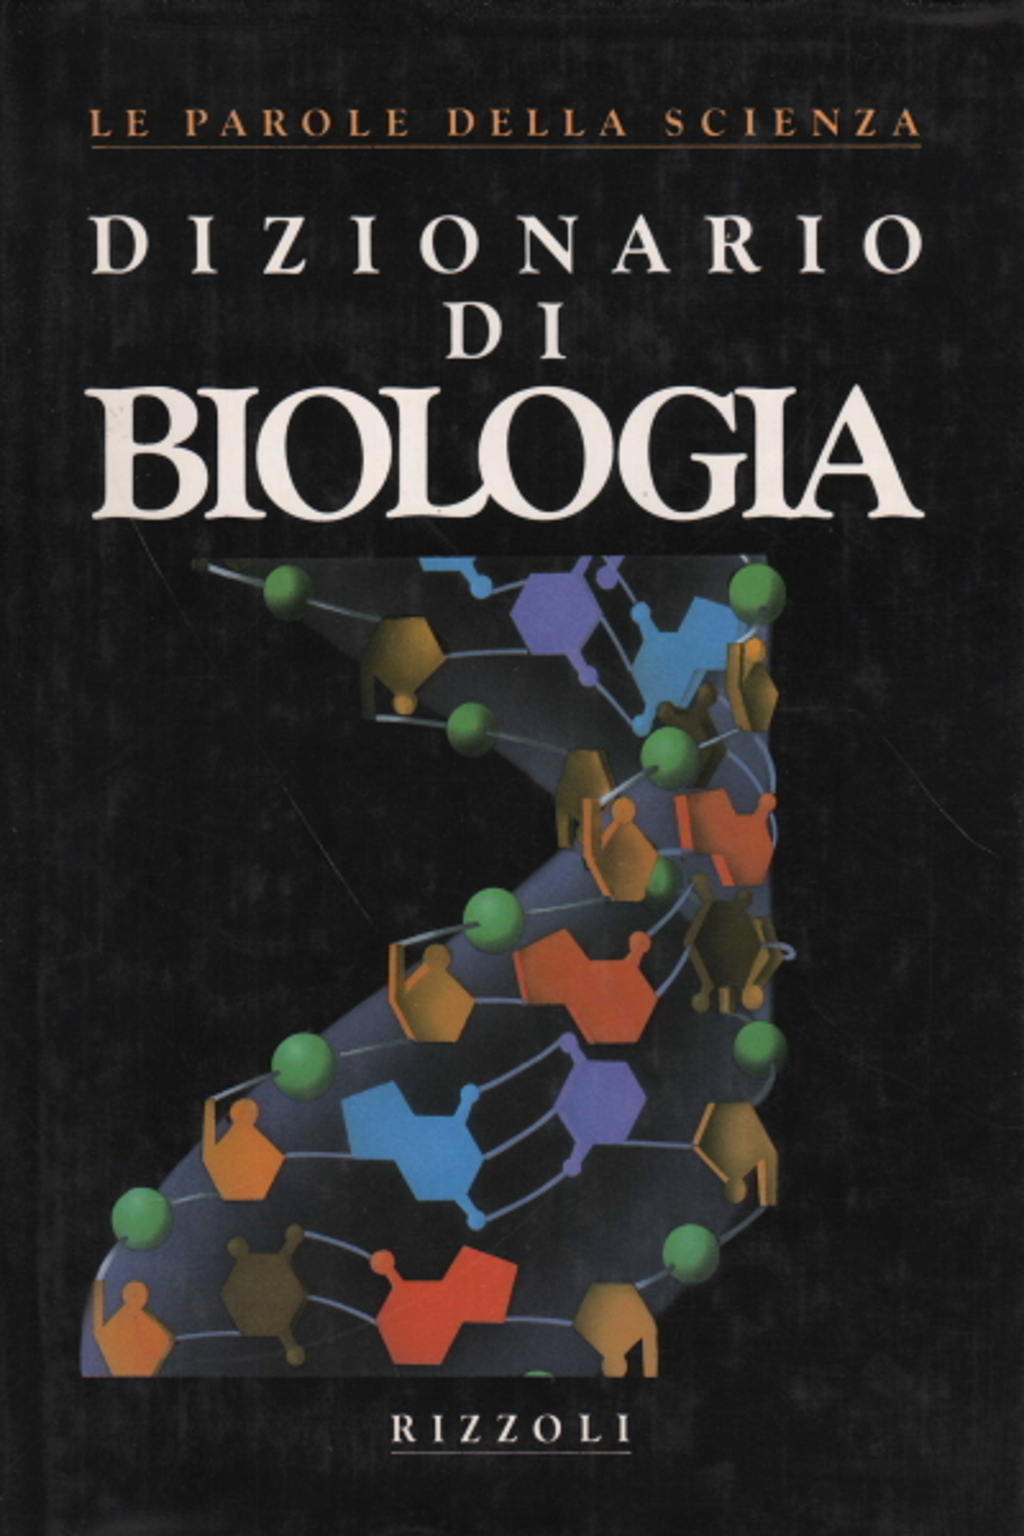 Dictionary of Biology, AA.VV.